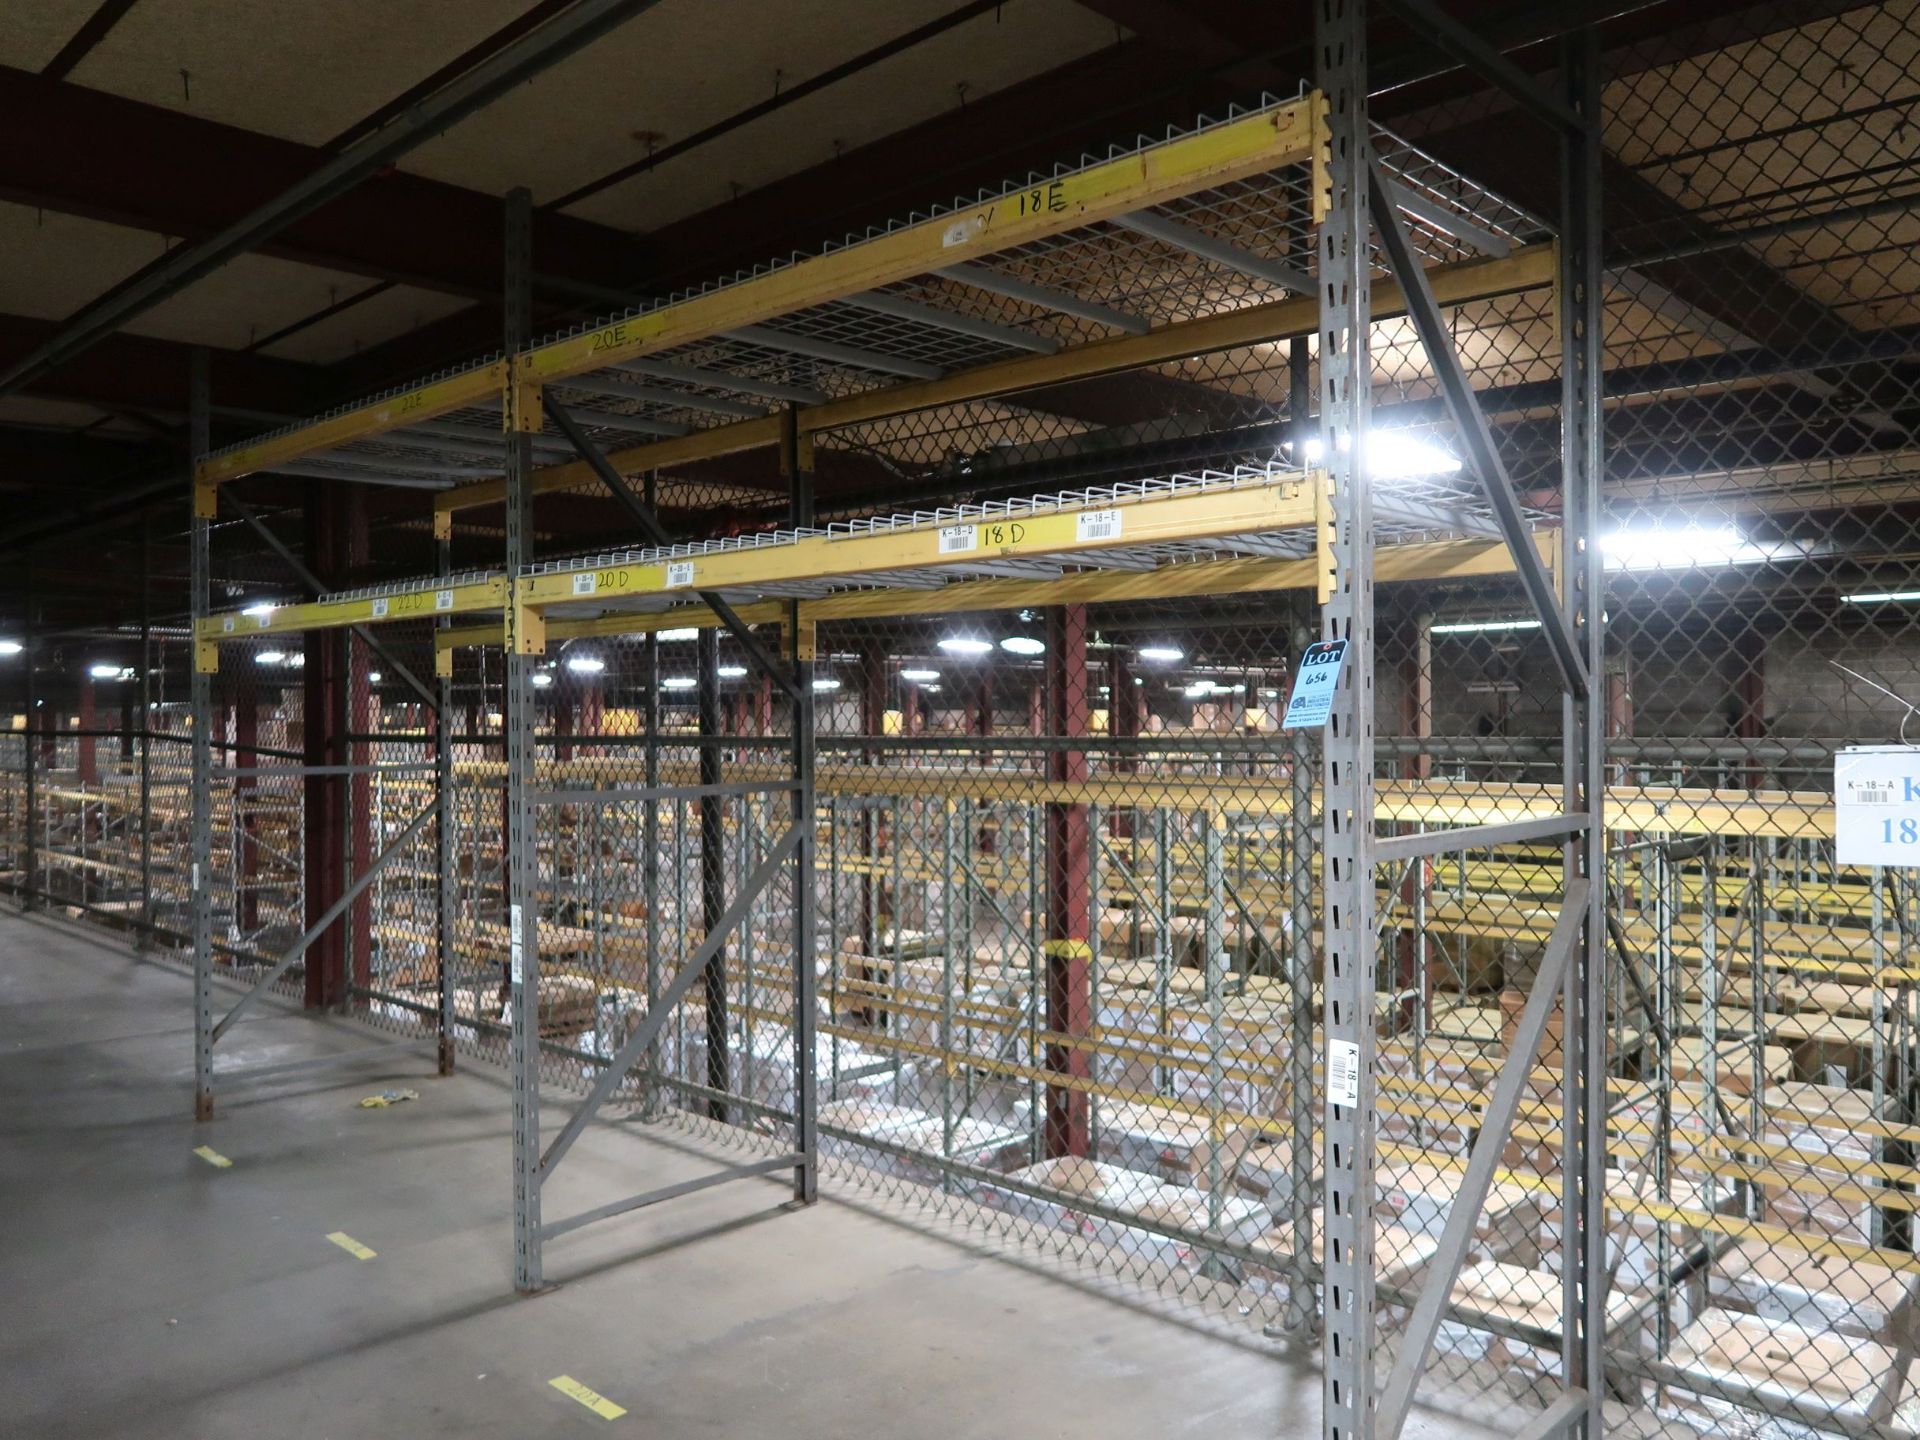 SECTIONS 96" X 42" X 120" ADJUSTABLE BEAM PALLET RACK; (3) 42" X 120" UPRIGHTS, (8) 96" X 3"